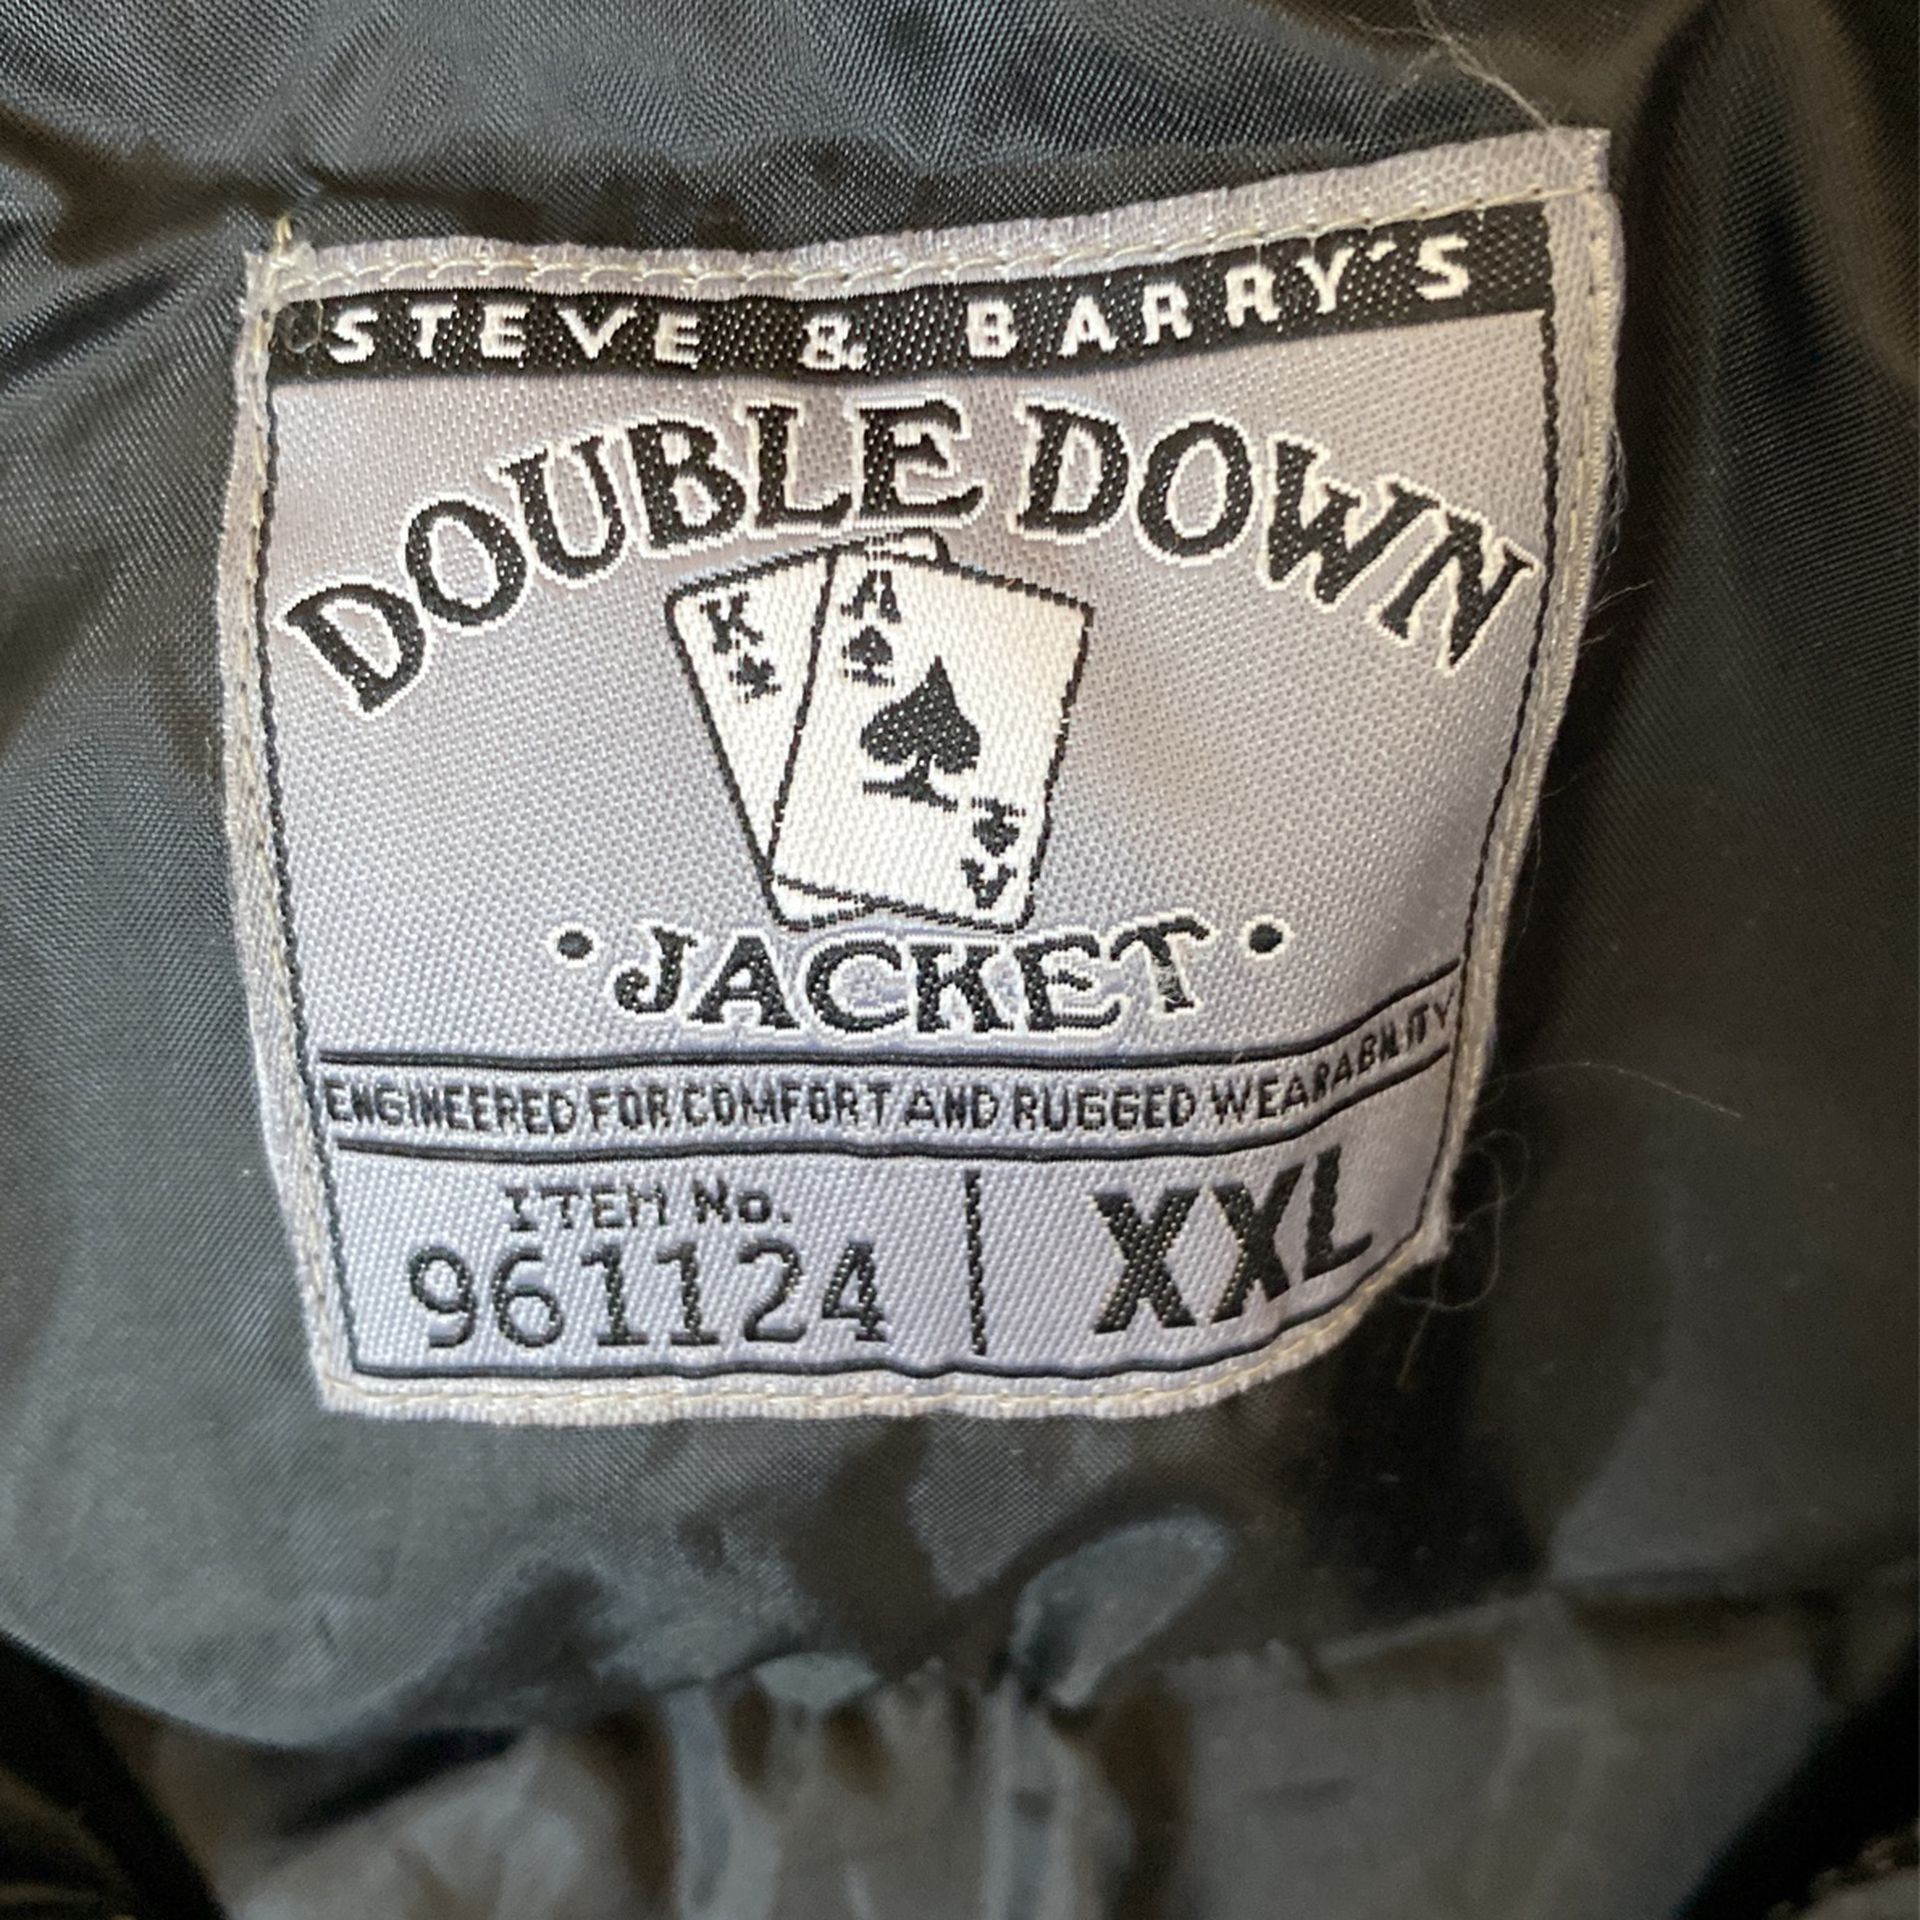 Steve and Barry’s double down jacket XXL